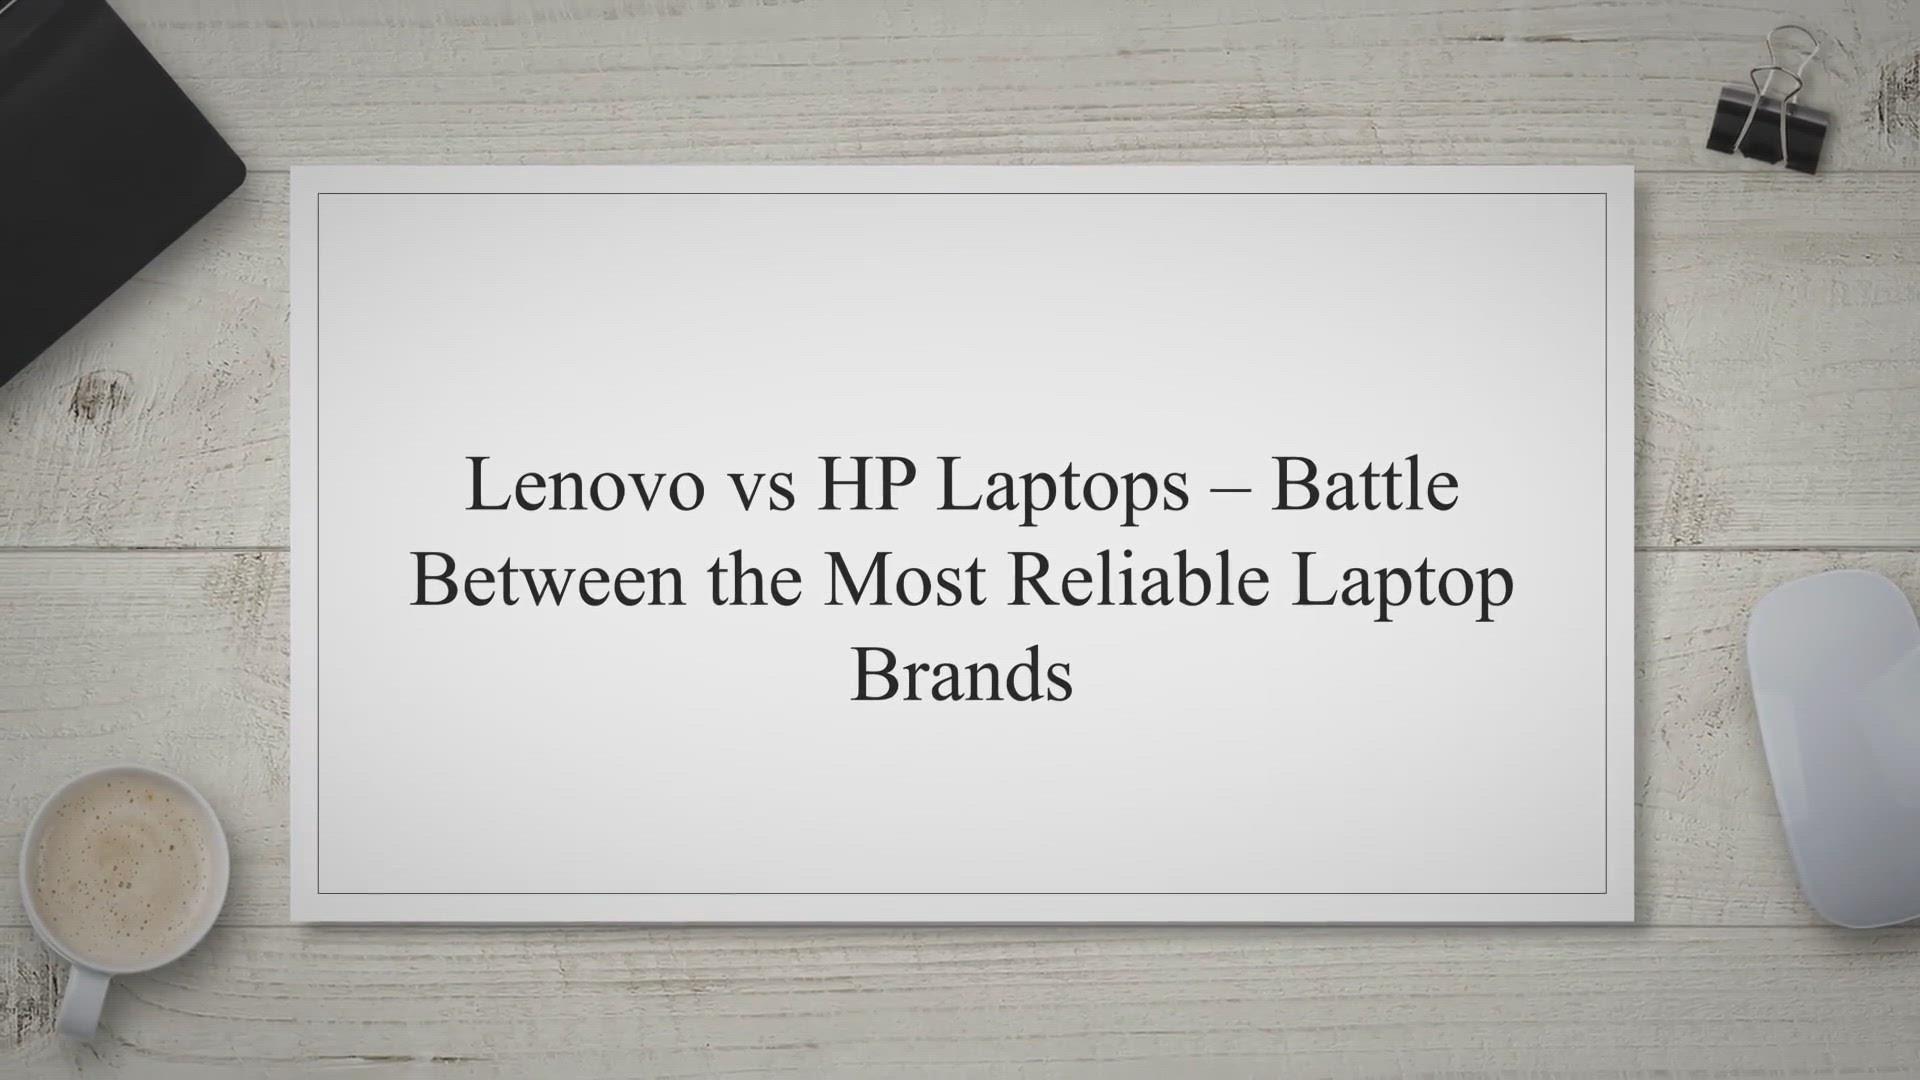 'Video thumbnail for Lenovo vs HP Laptops - Battle Between the Most Reliable Laptop Brands'